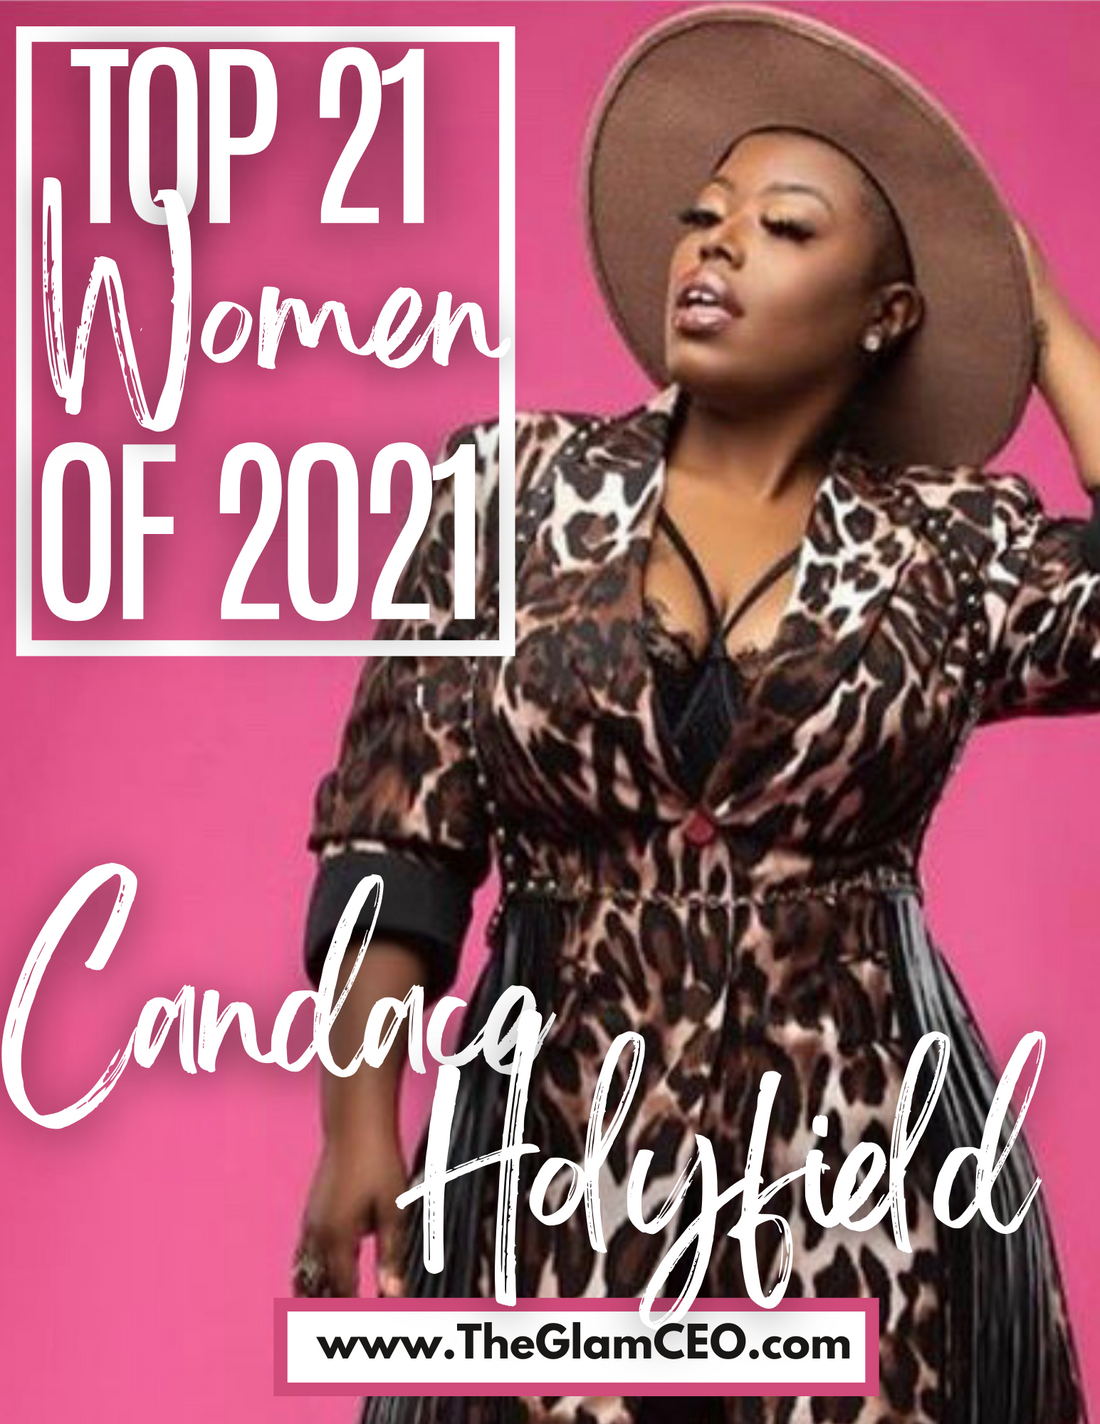 Top 21 Women of 2021: Candace Holyfield